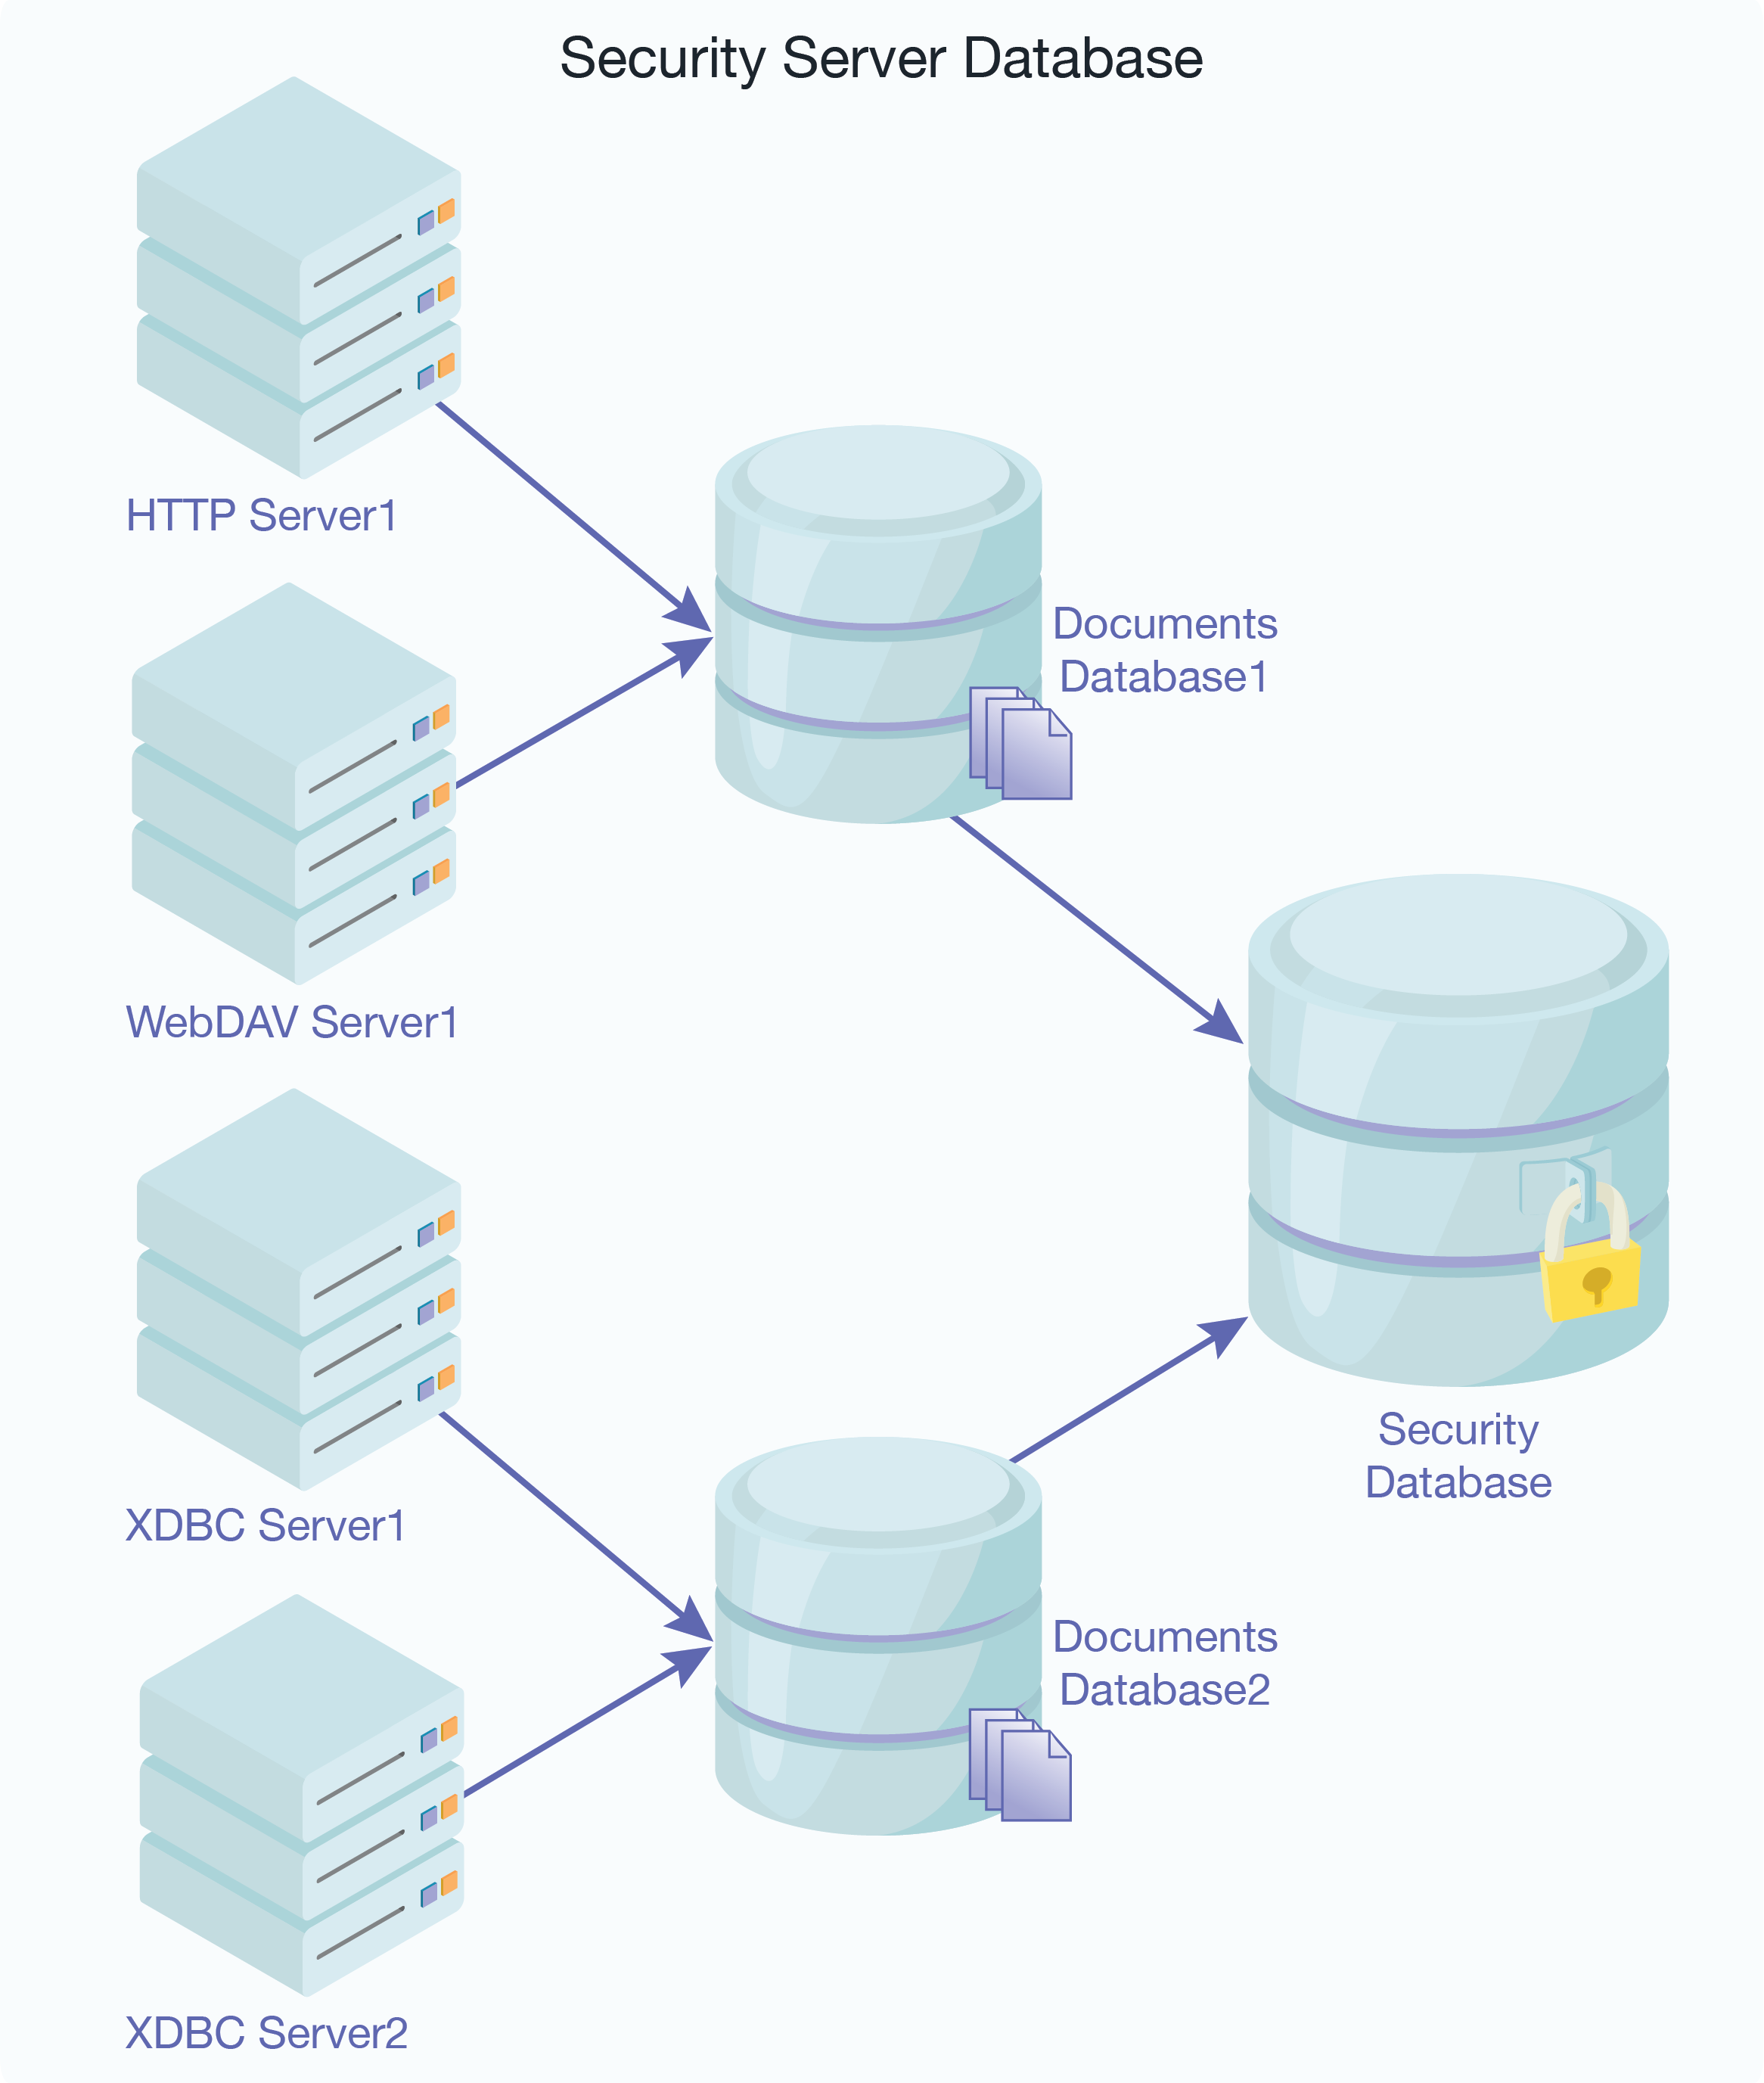 Diagram showing many document databases from many servers sharing the same security database